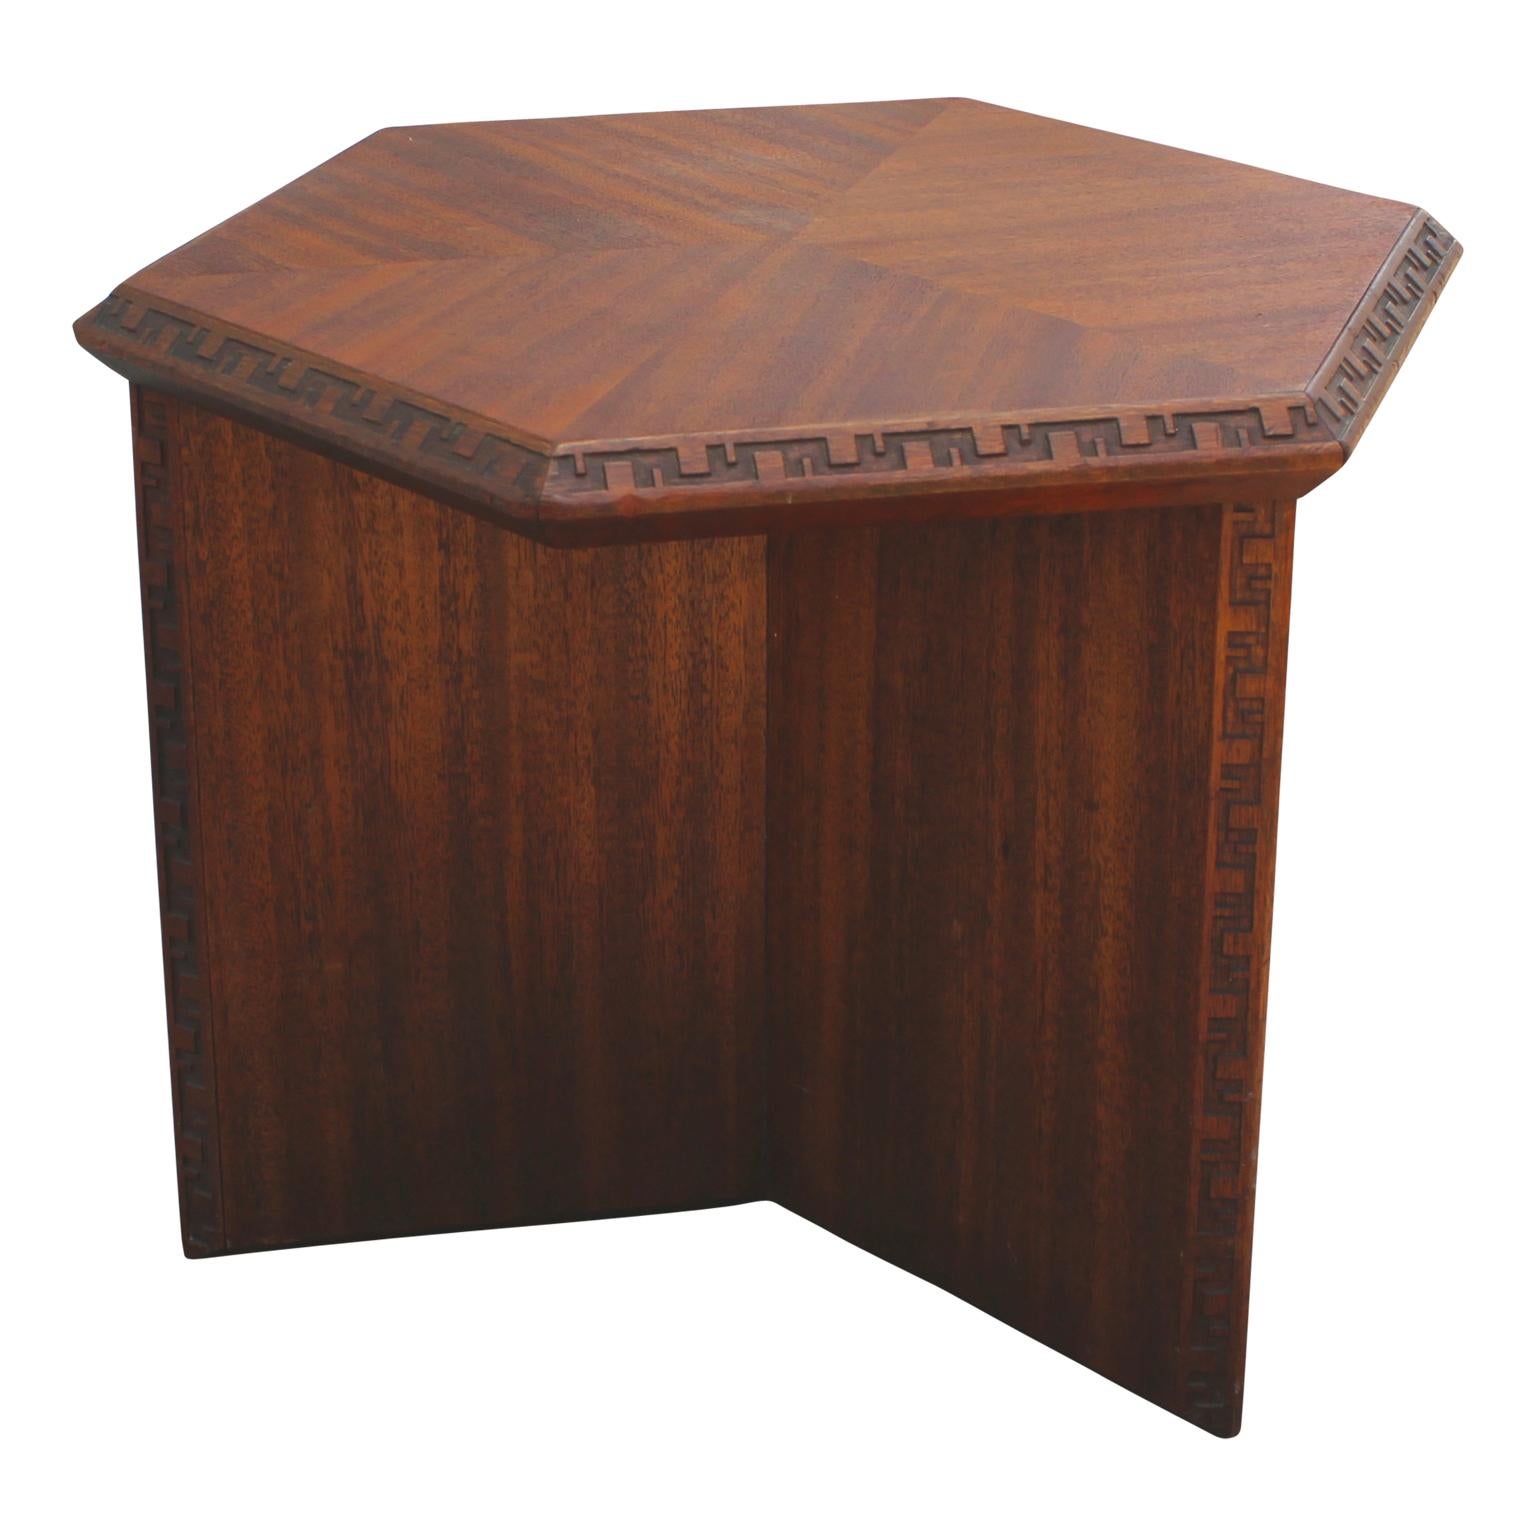 Mid-Century Modern Pair of Signed Hexagon Greek Key End Tables by Frank Lloyd Wright for Henredon